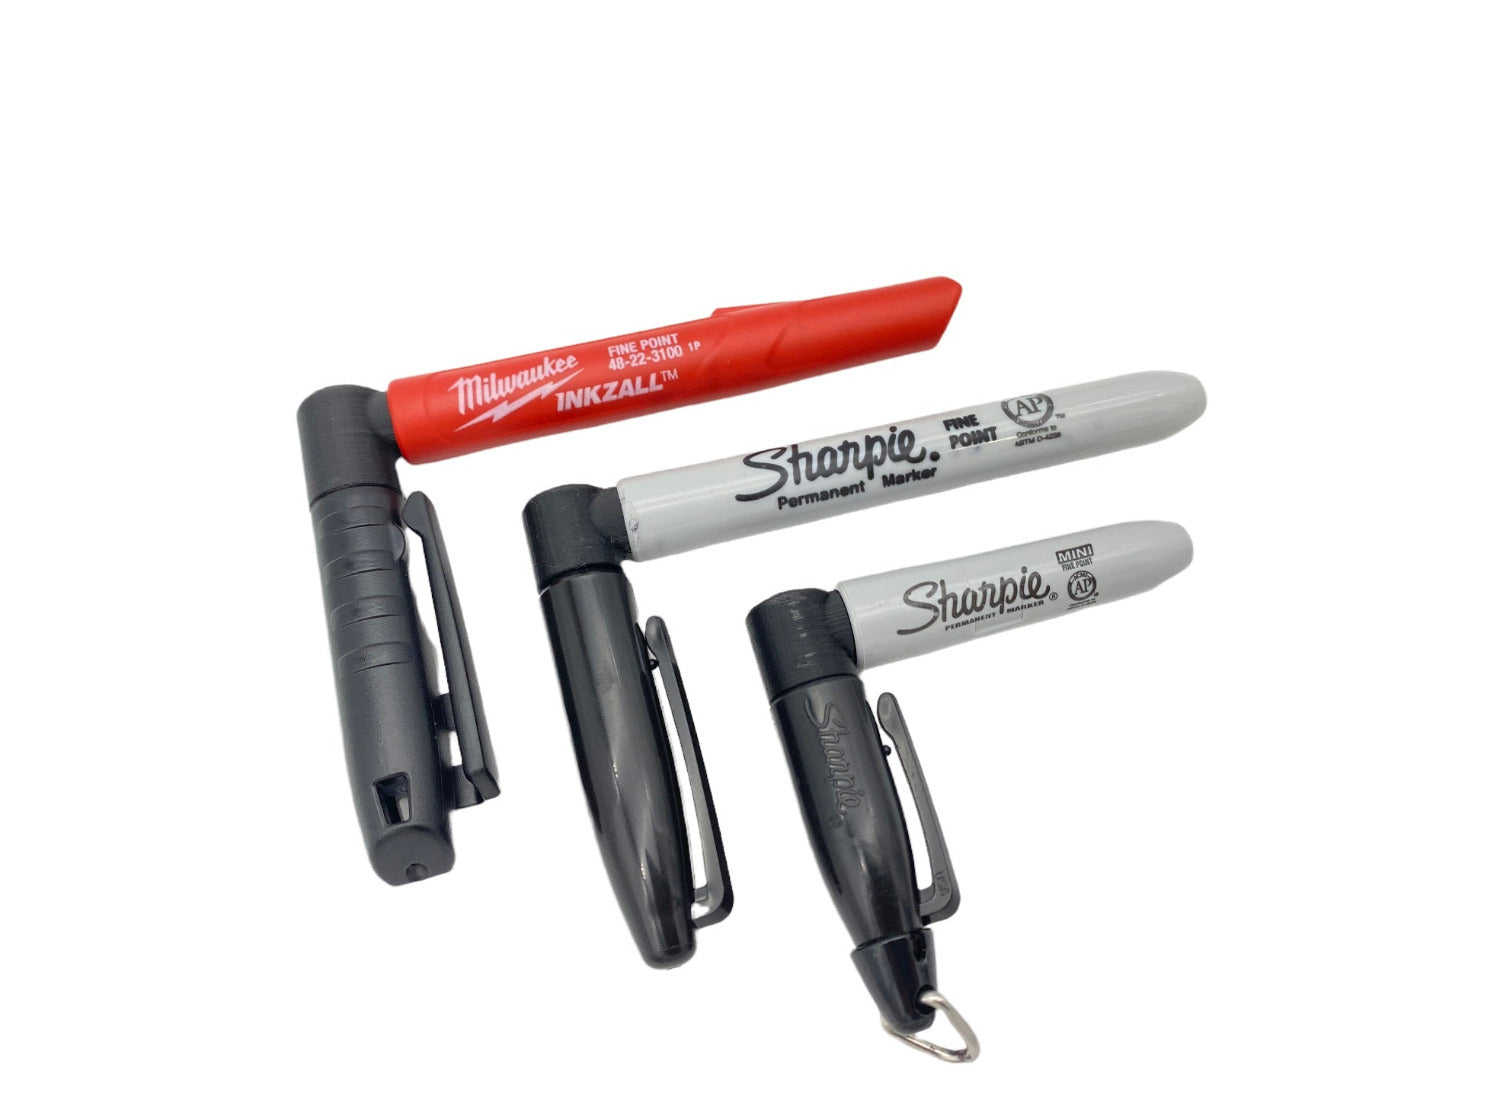 (5) Right Angle Sharpie Adapters